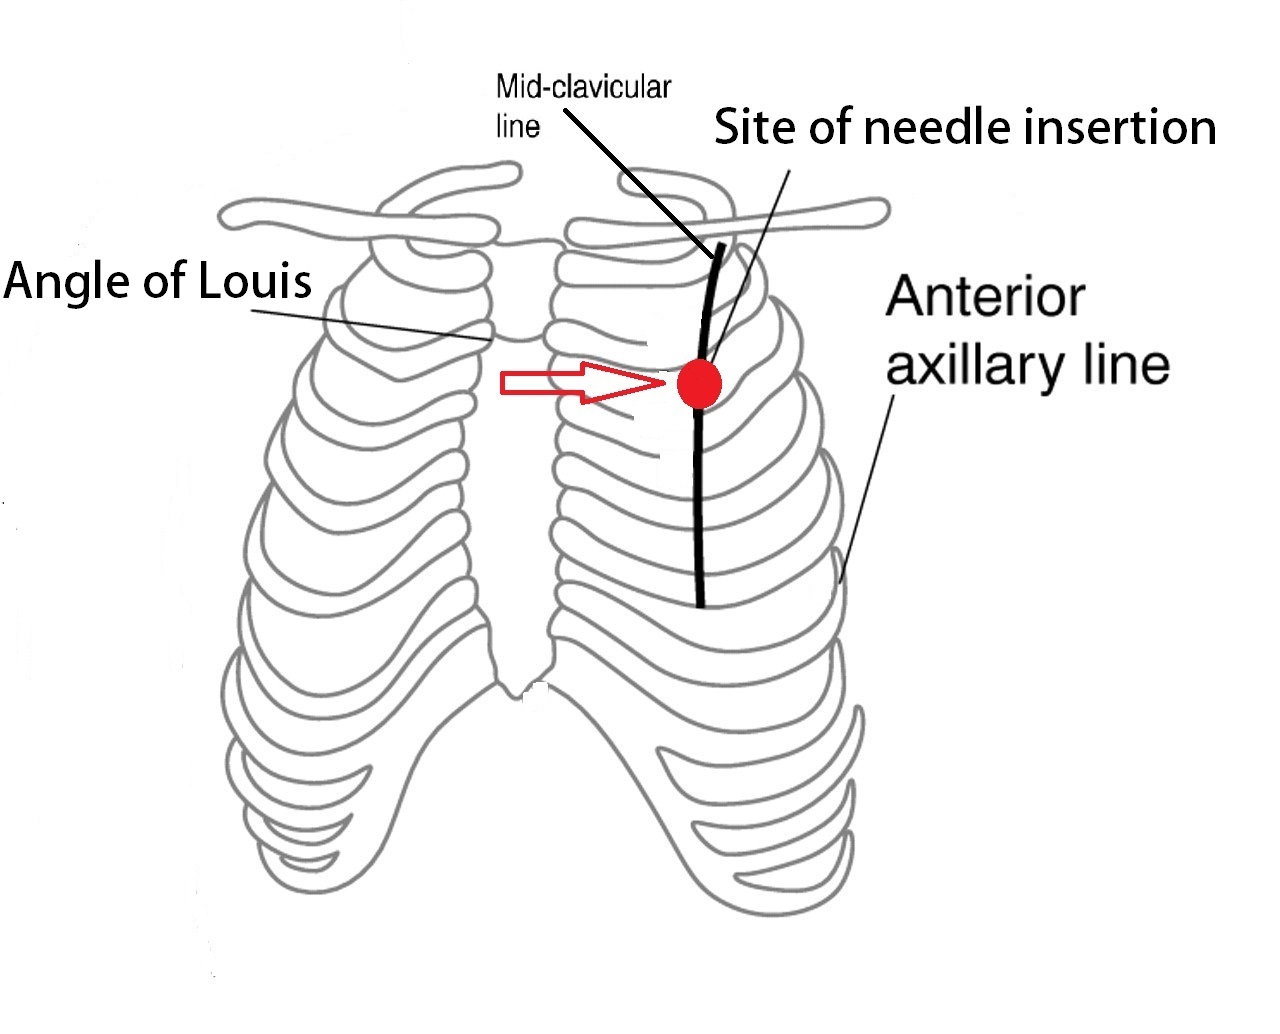 File:Site of needle insertion.jpg